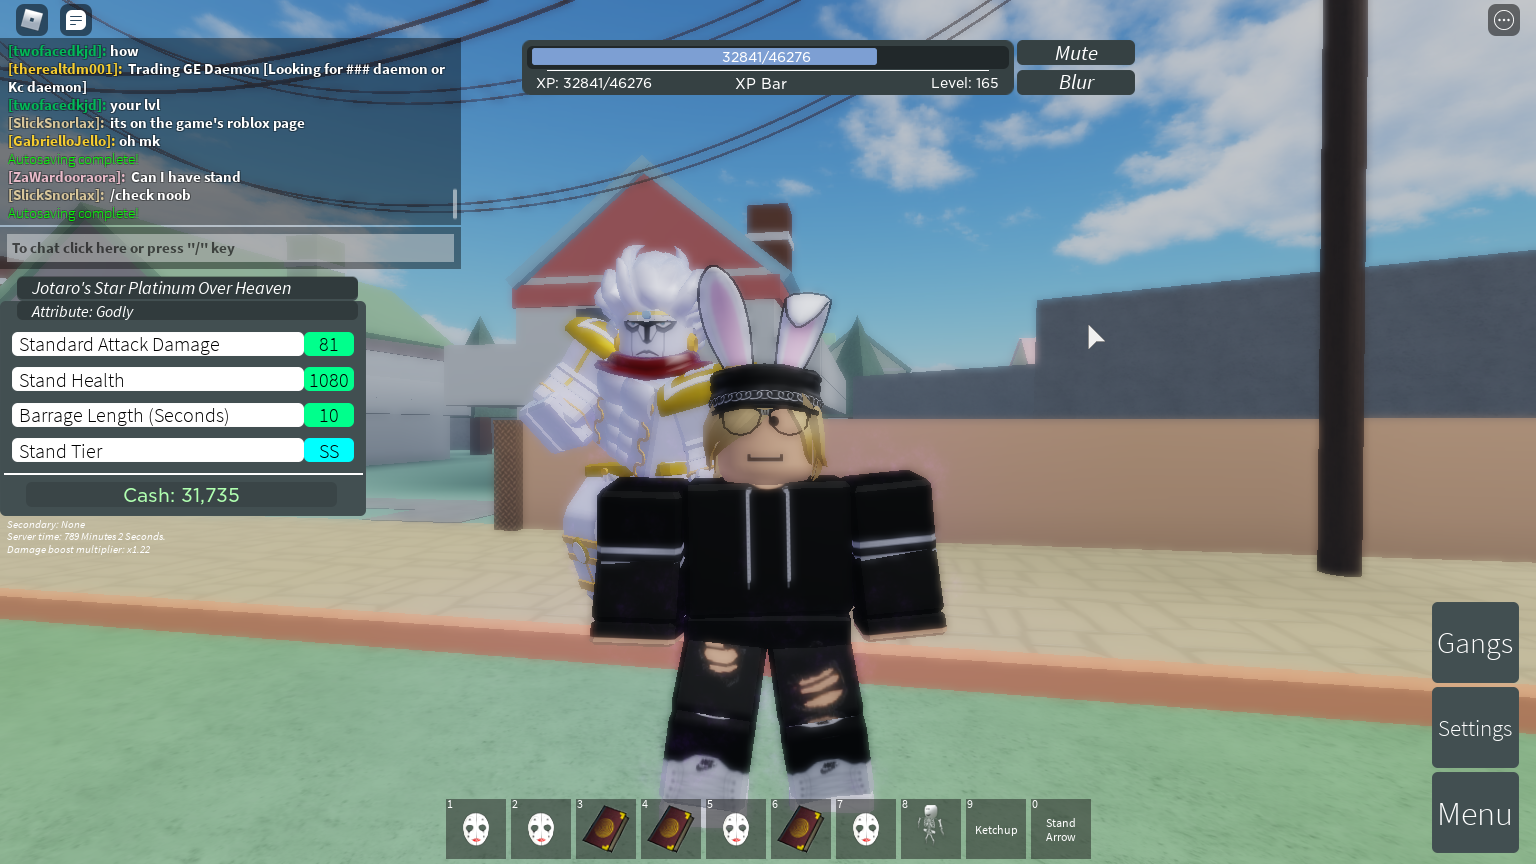 Trading Godly Jotaro S Star Platinum Over Heaven Looking For A High Attribute Weather Report Fandom - roblox weather report roblox